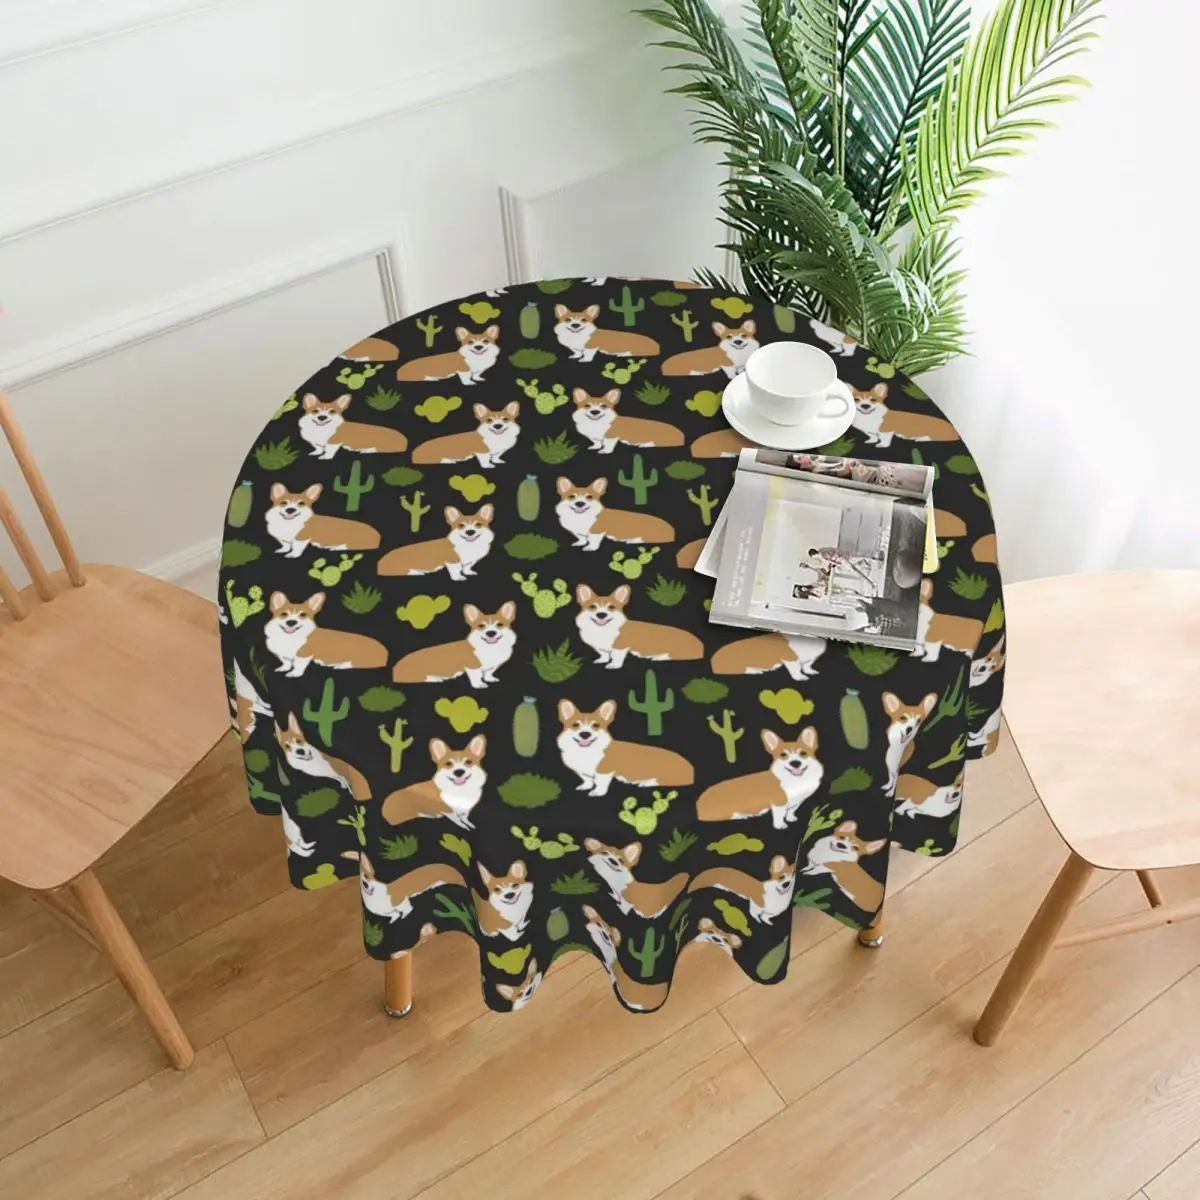 

Cute Corgi Tablecloth Cactus Print Cheap Beautiful Table Cover Dining Printed Protection Polyester Table Cloth